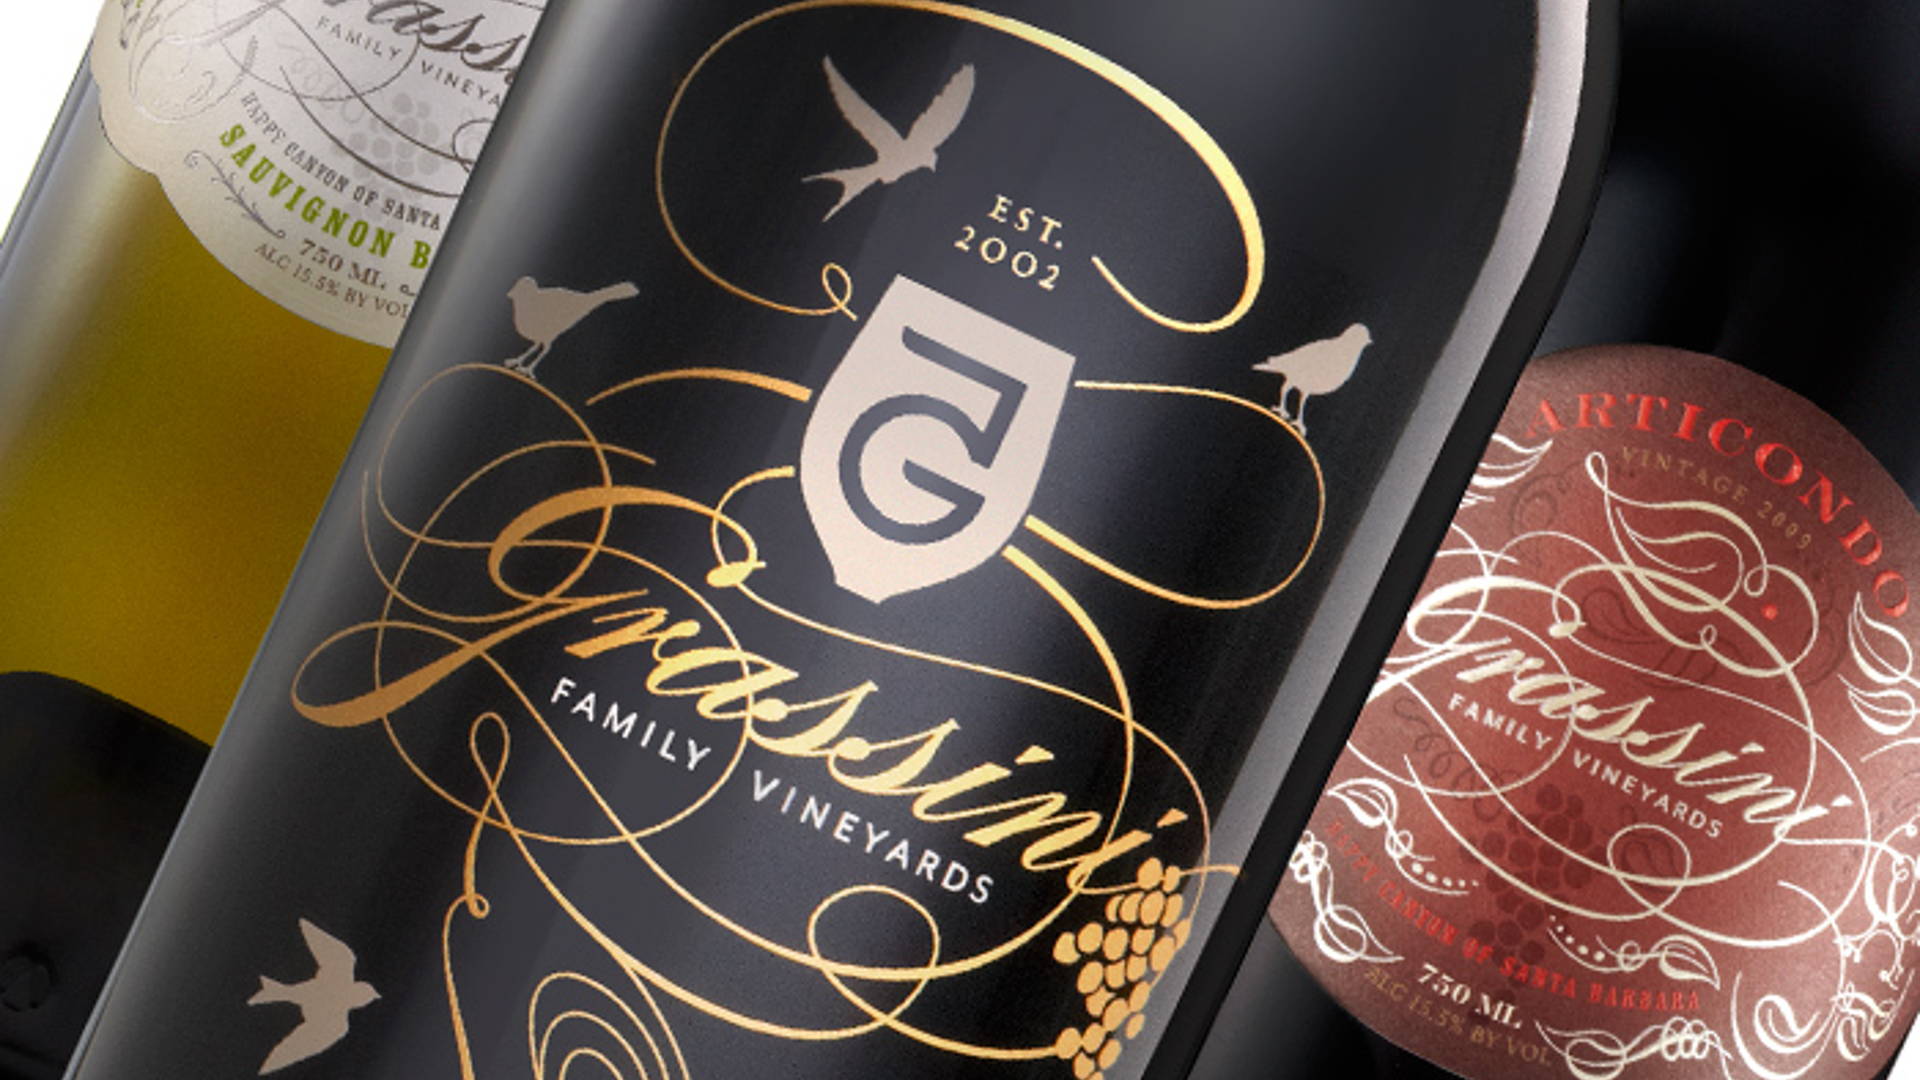 Featured image for Grassini Family Vinyards